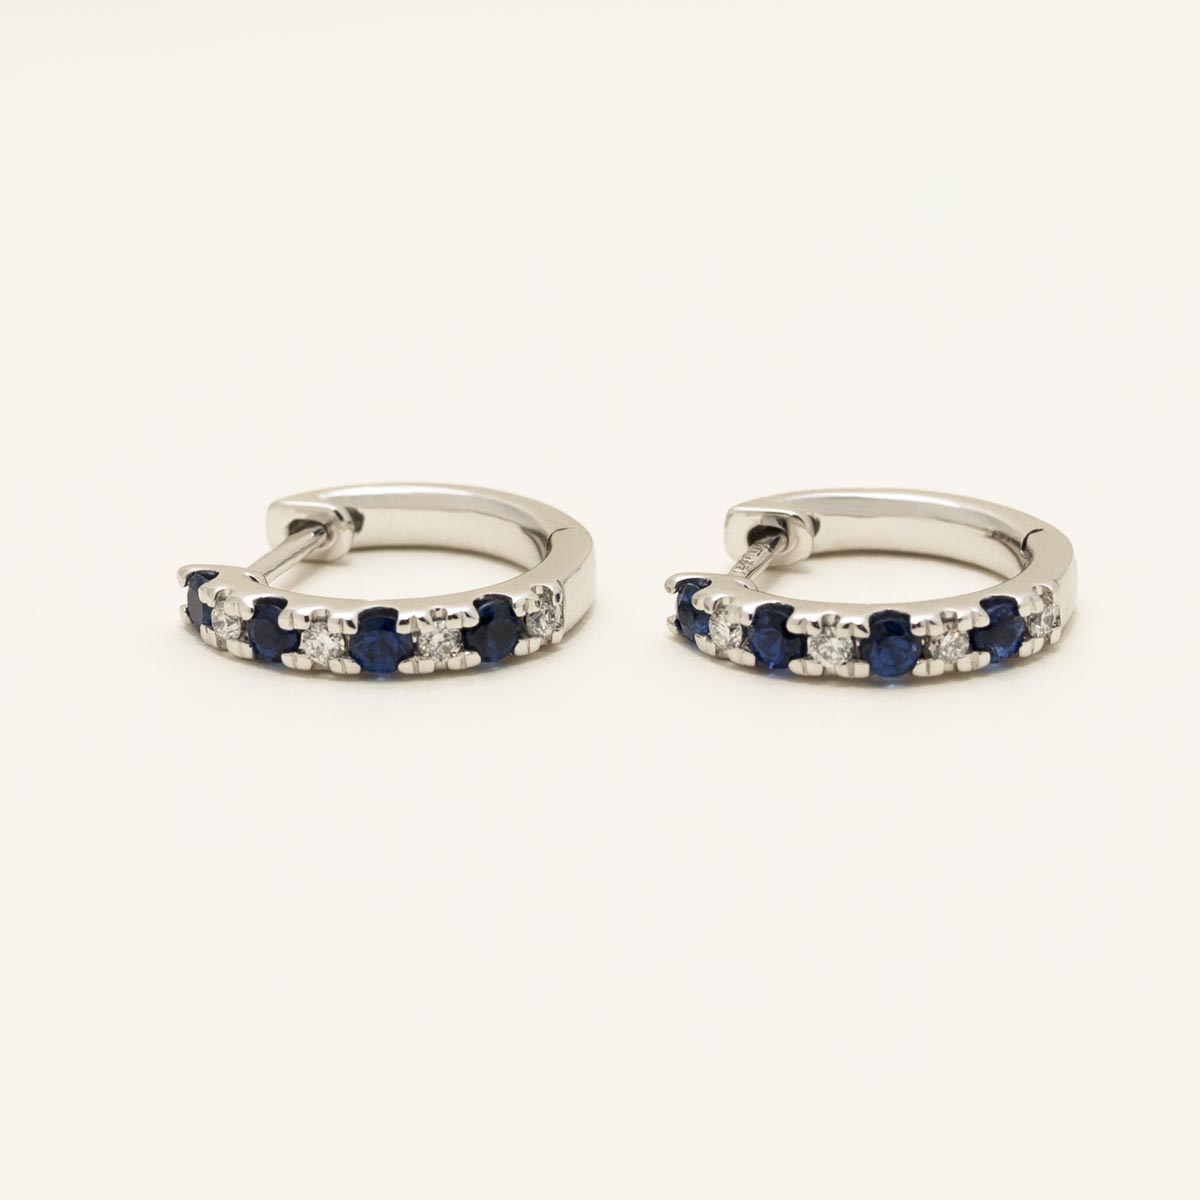 Sapphire Hoop Earrings in 14kt White Gold with Diamonds (1/10ct tw)